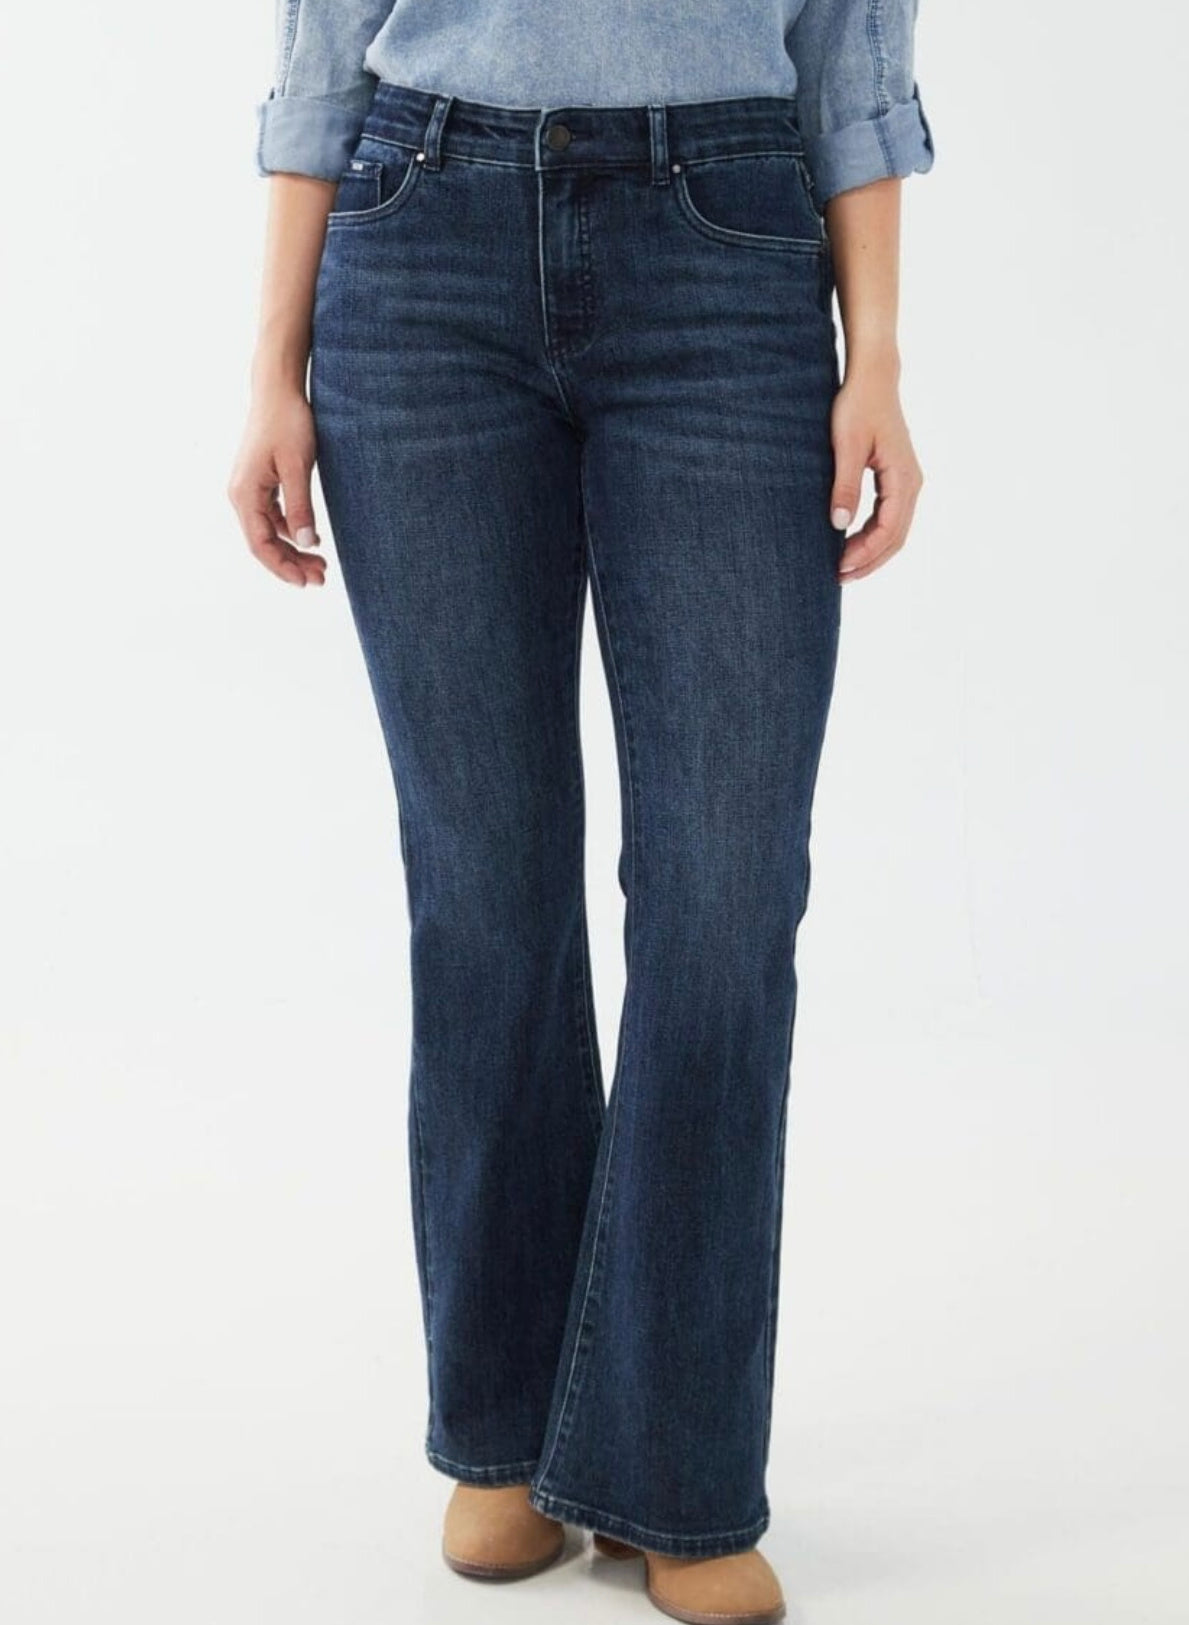 High rise flare jeans